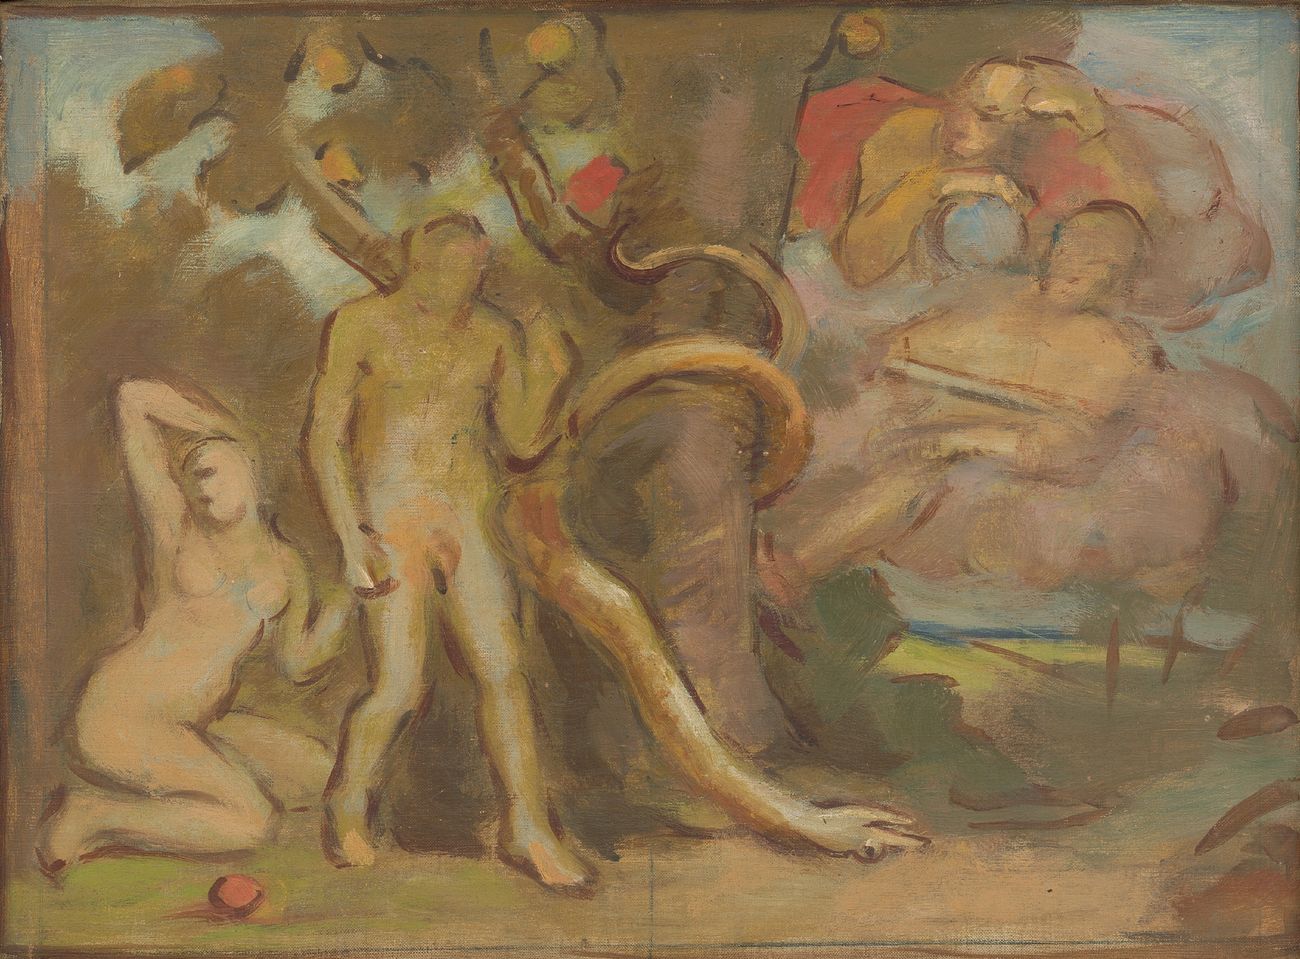 Temptation 'adam and eve' by Milan